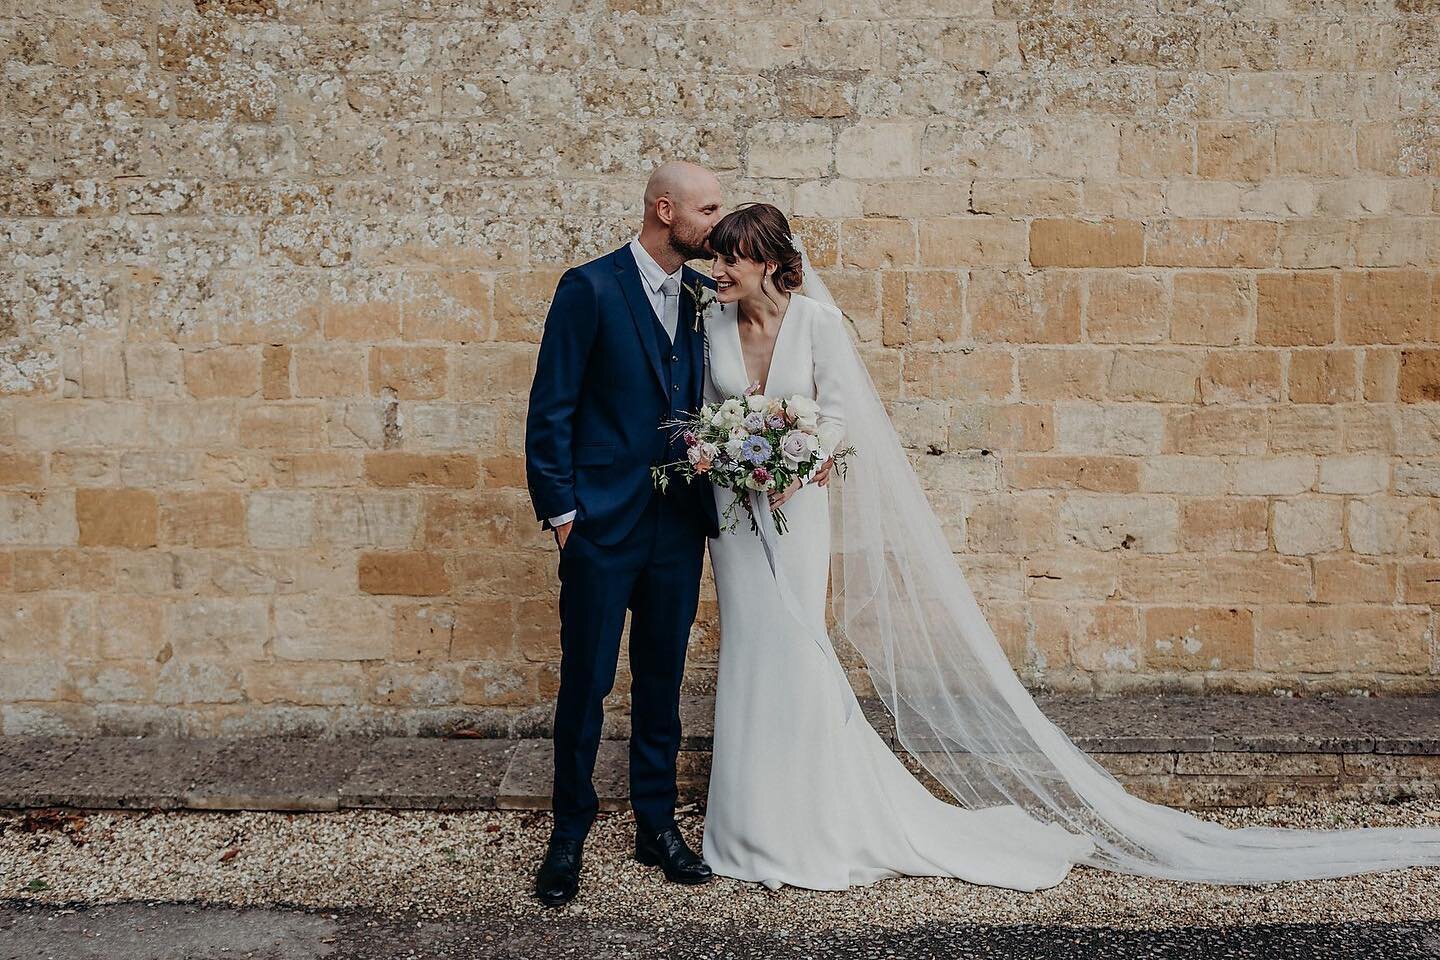 S&amp;R - so much love for this couple who married last September at @lapstonebarn. Happy Anniversary @soph.greenwell &amp; @rgreenwr08! 

Photographer- @victoriasomersethowphotography 
Venue - @lapstonebarn 
Dress - @sassiholford 
Suit - @editsuits 